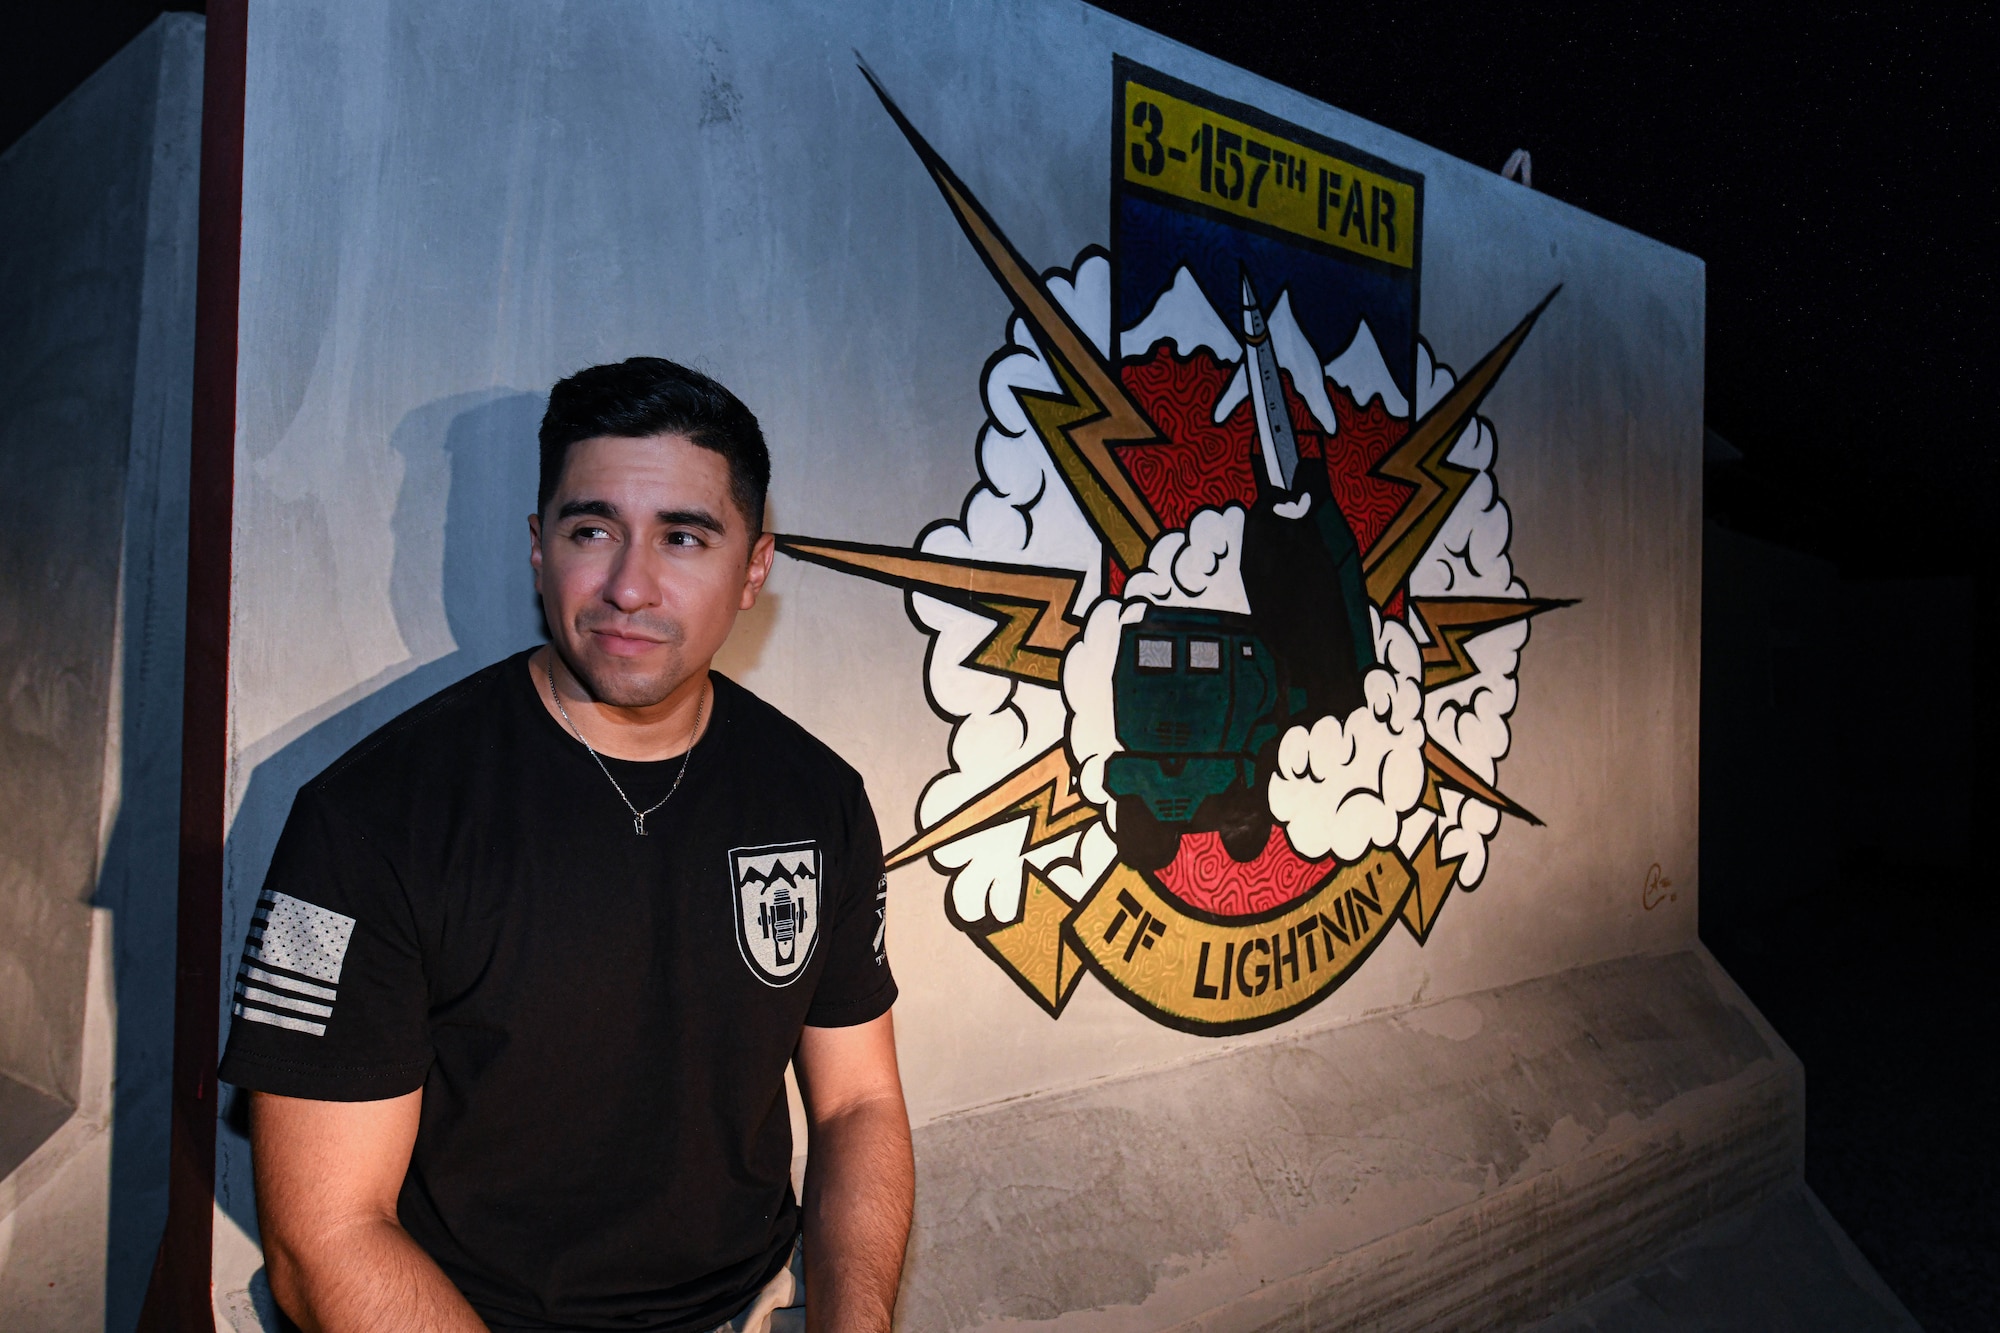 U.S. Army Sgt. Anthony Castillo, a mobility specialist assigned to the 3-157th Field Artillery unit and Colorado National Guardsmen, paints ten murals across Al Dhafra Air Base.